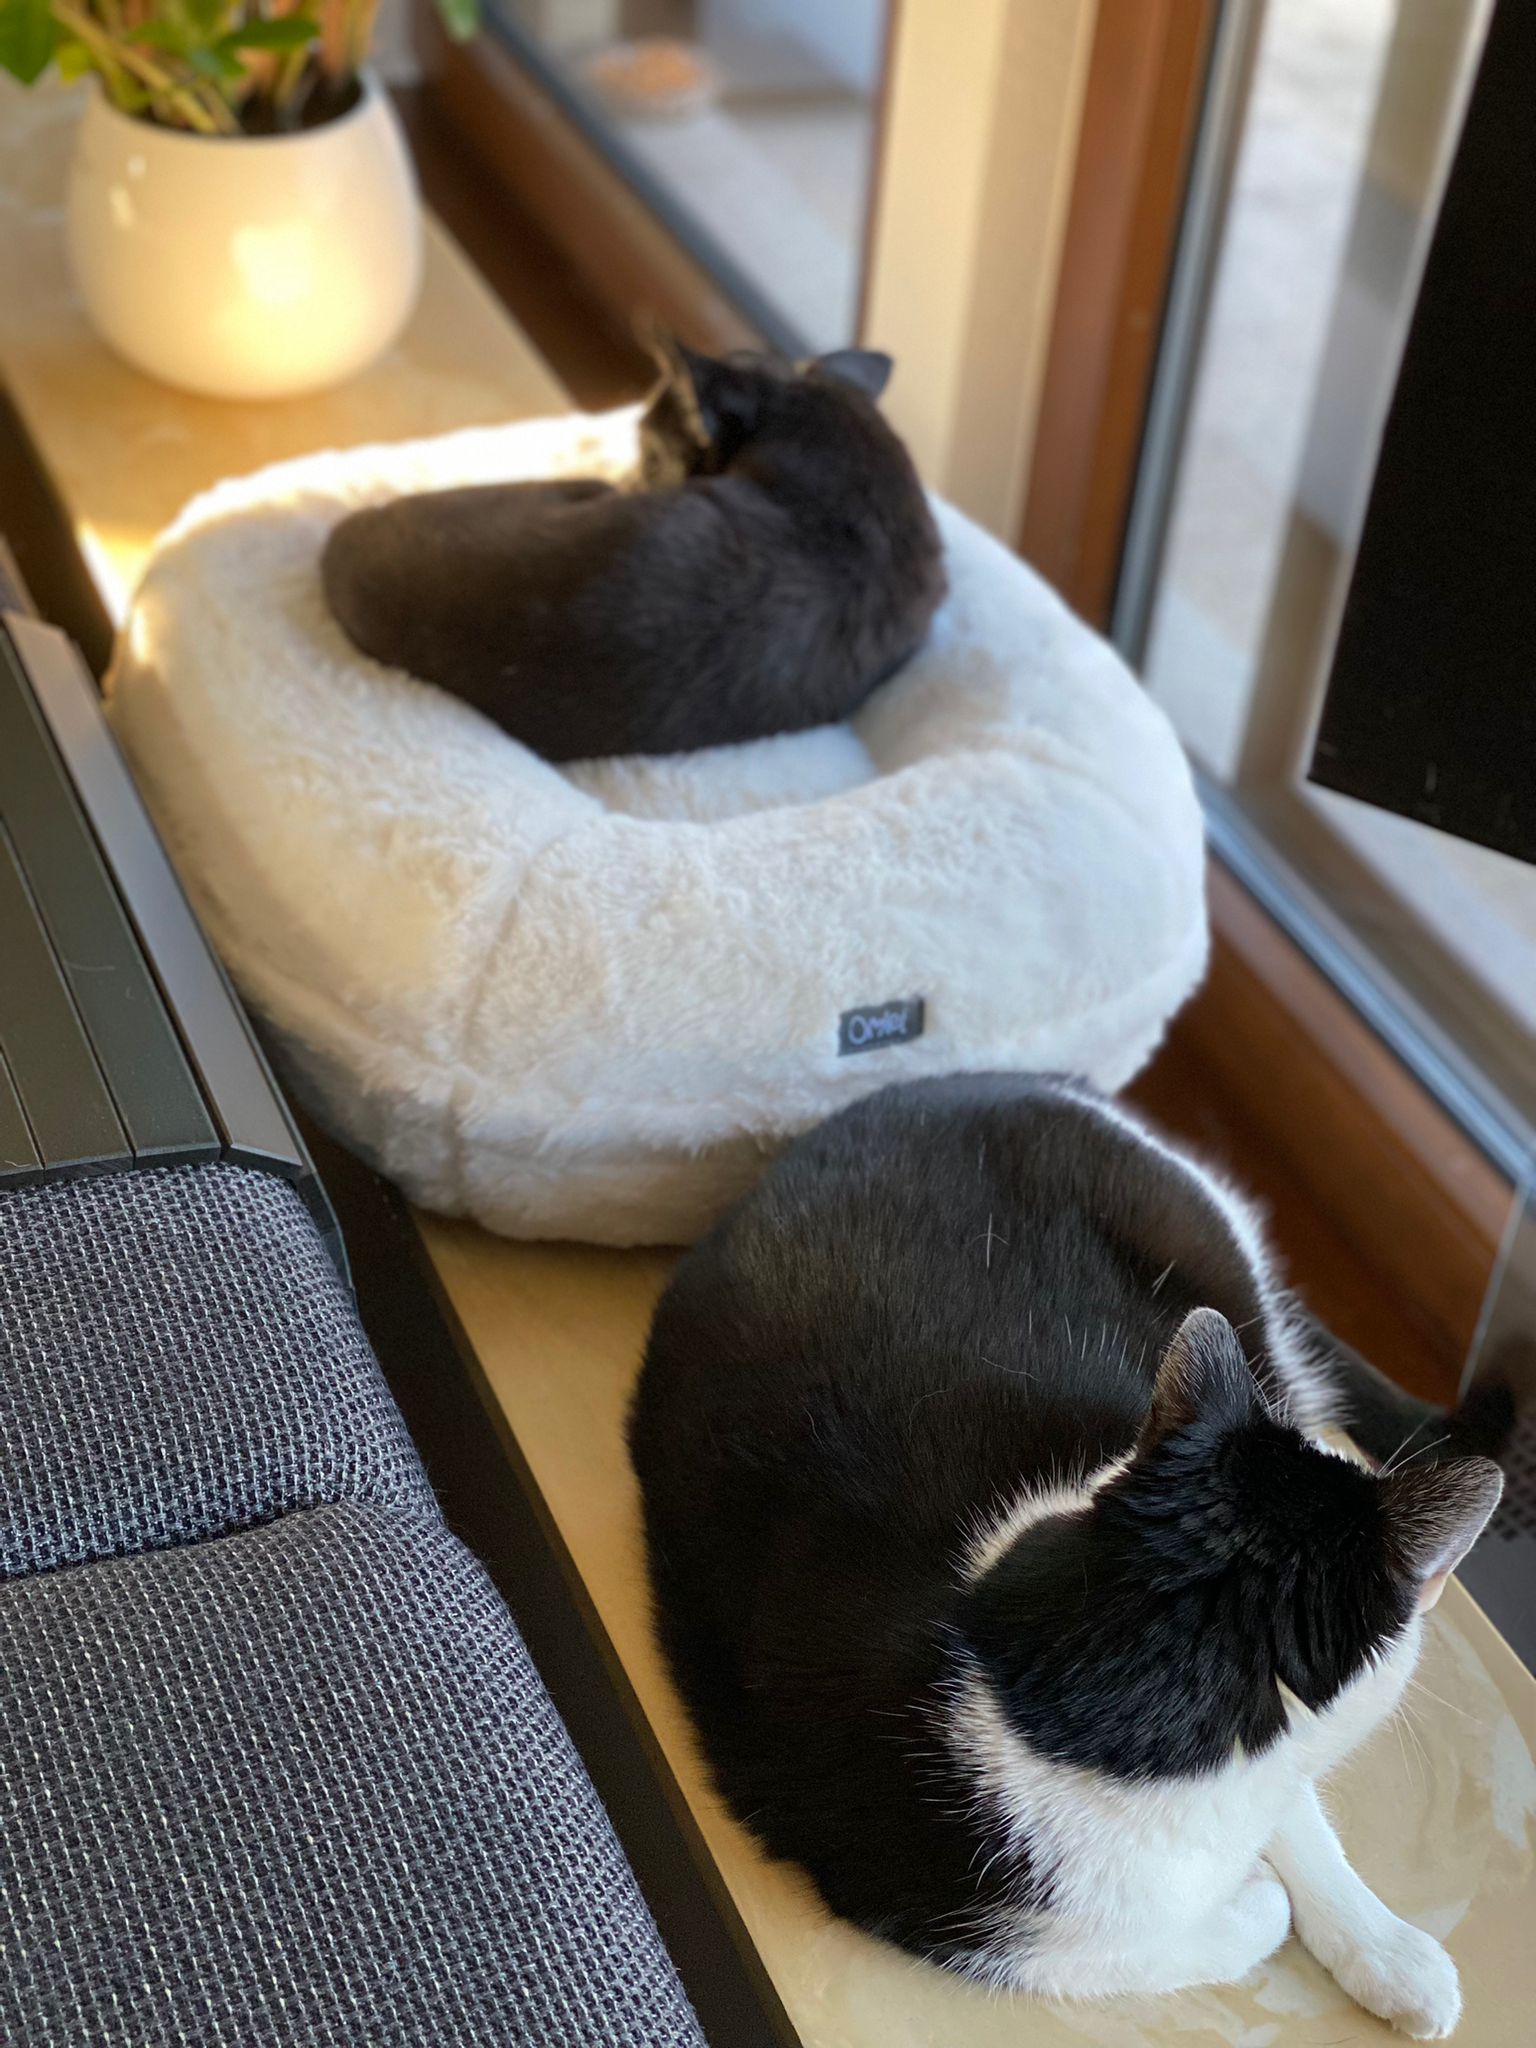 A dog in a white donut shaped cat bed, a cat next to him